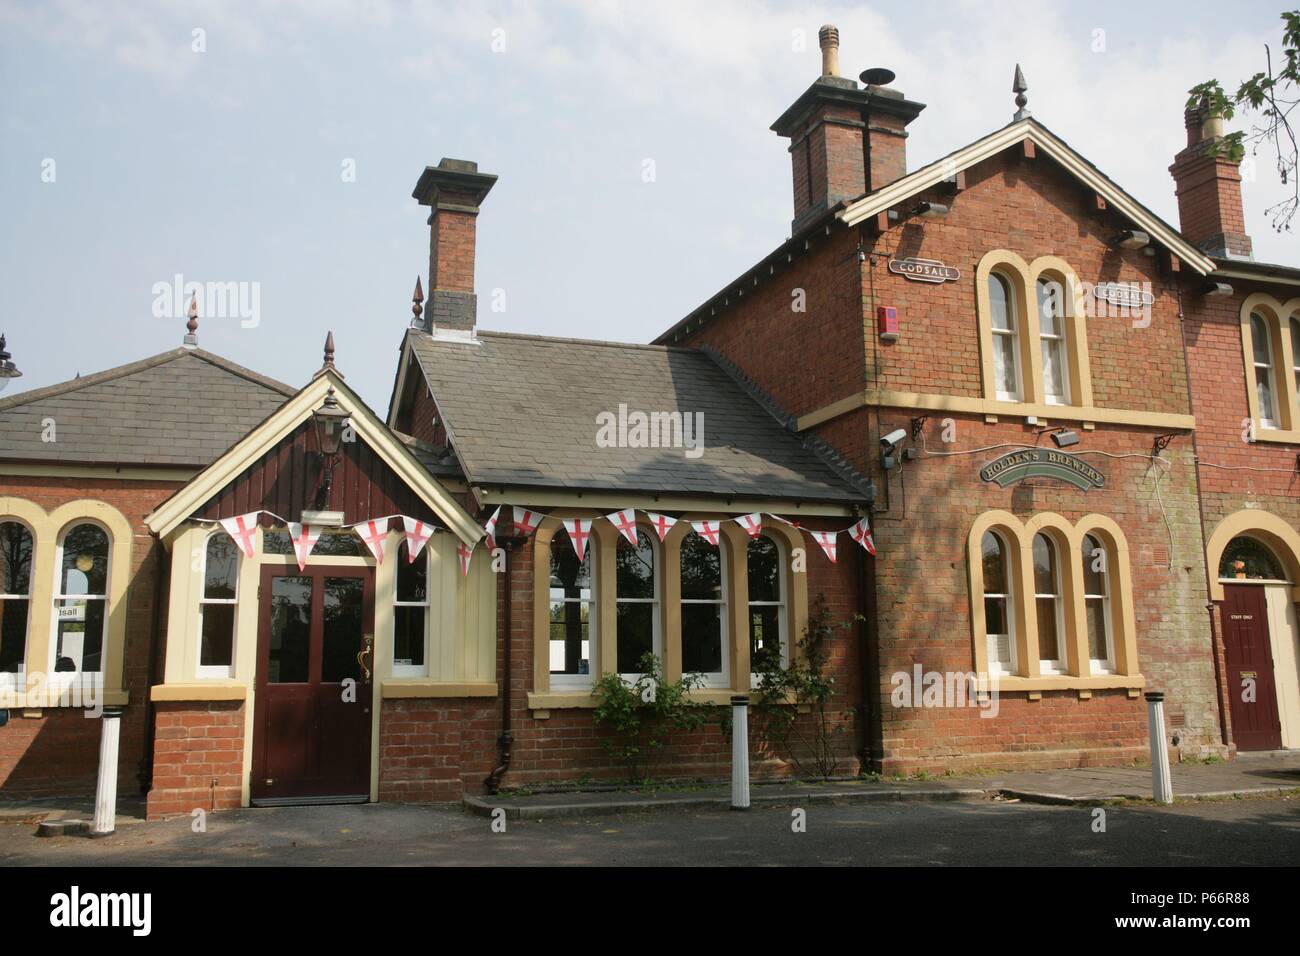 Main station building at Codsall, Staffordshire, now converted to a pub and restaurant. 2007 Stock Photo